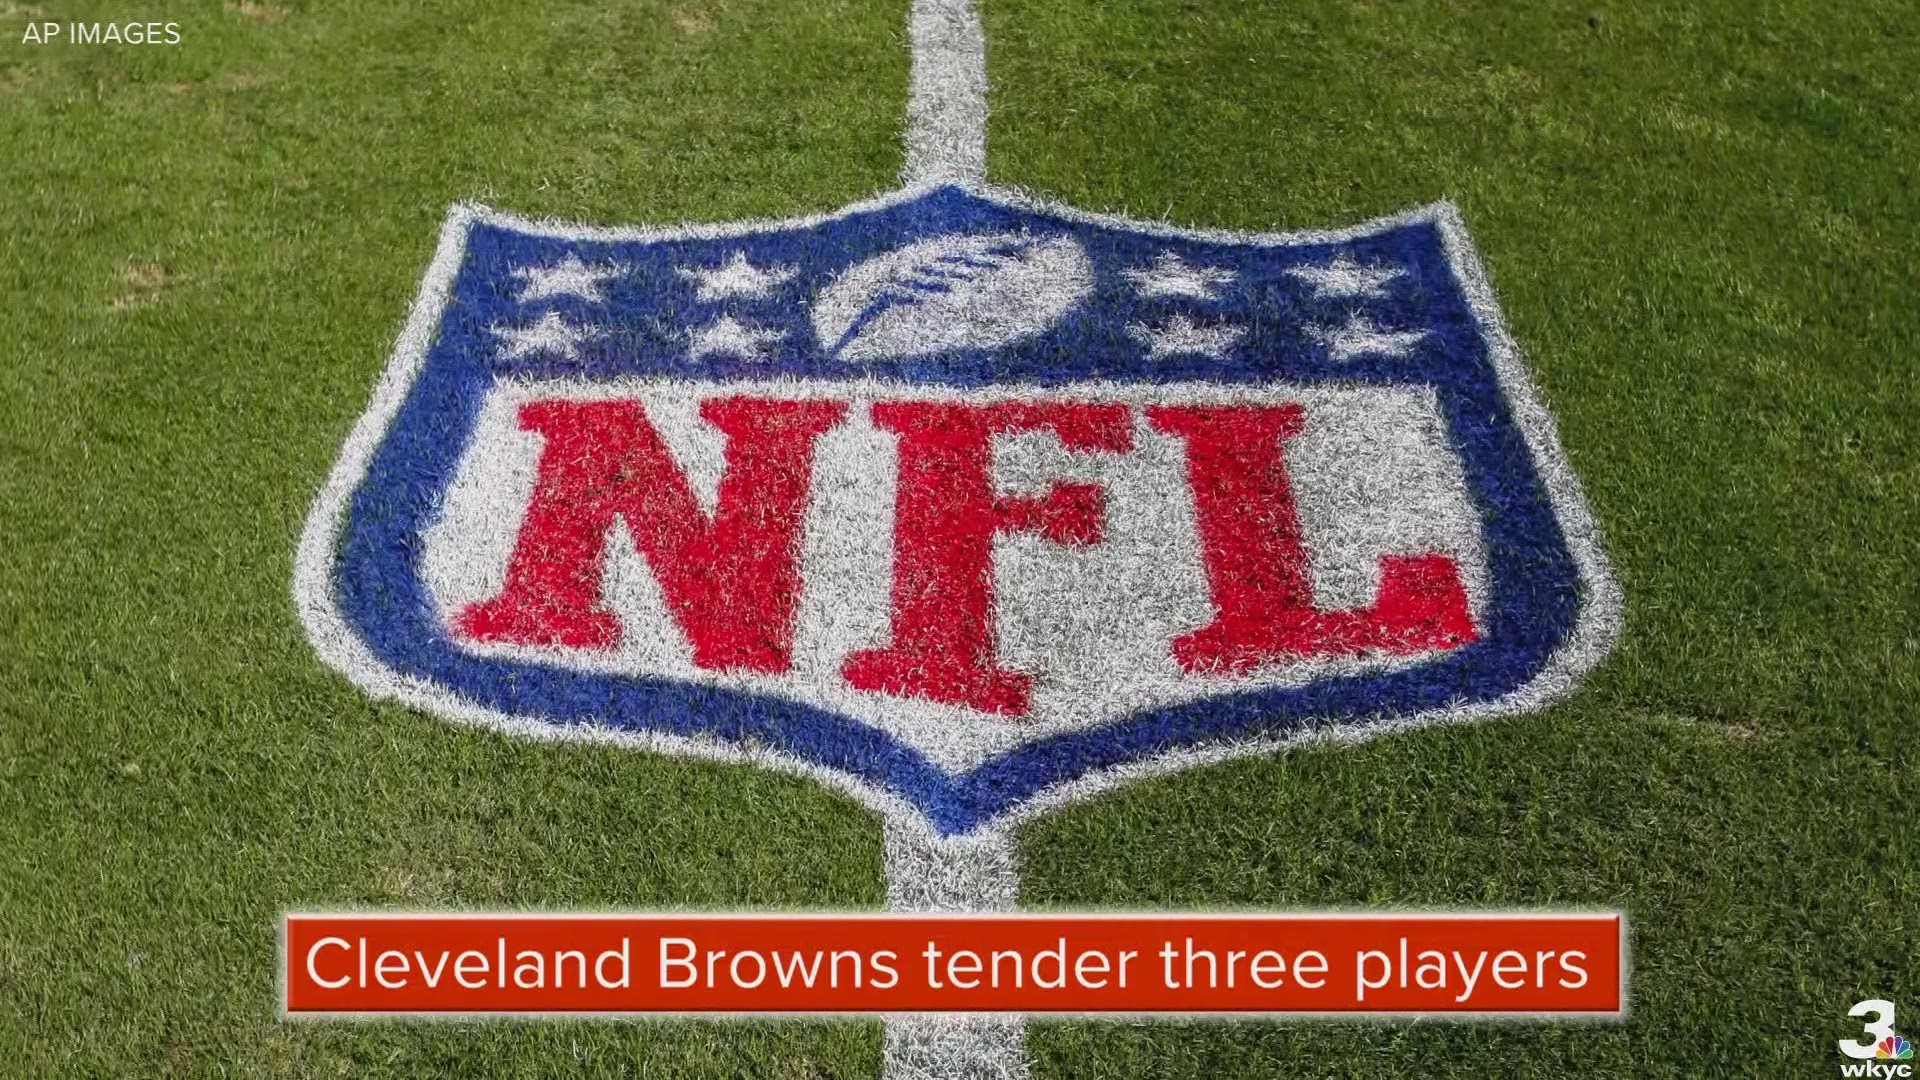 On Friday, the Cleveland Browns announced they have placed free agent tenders on three players, including wide receiver Rashard Higgins.